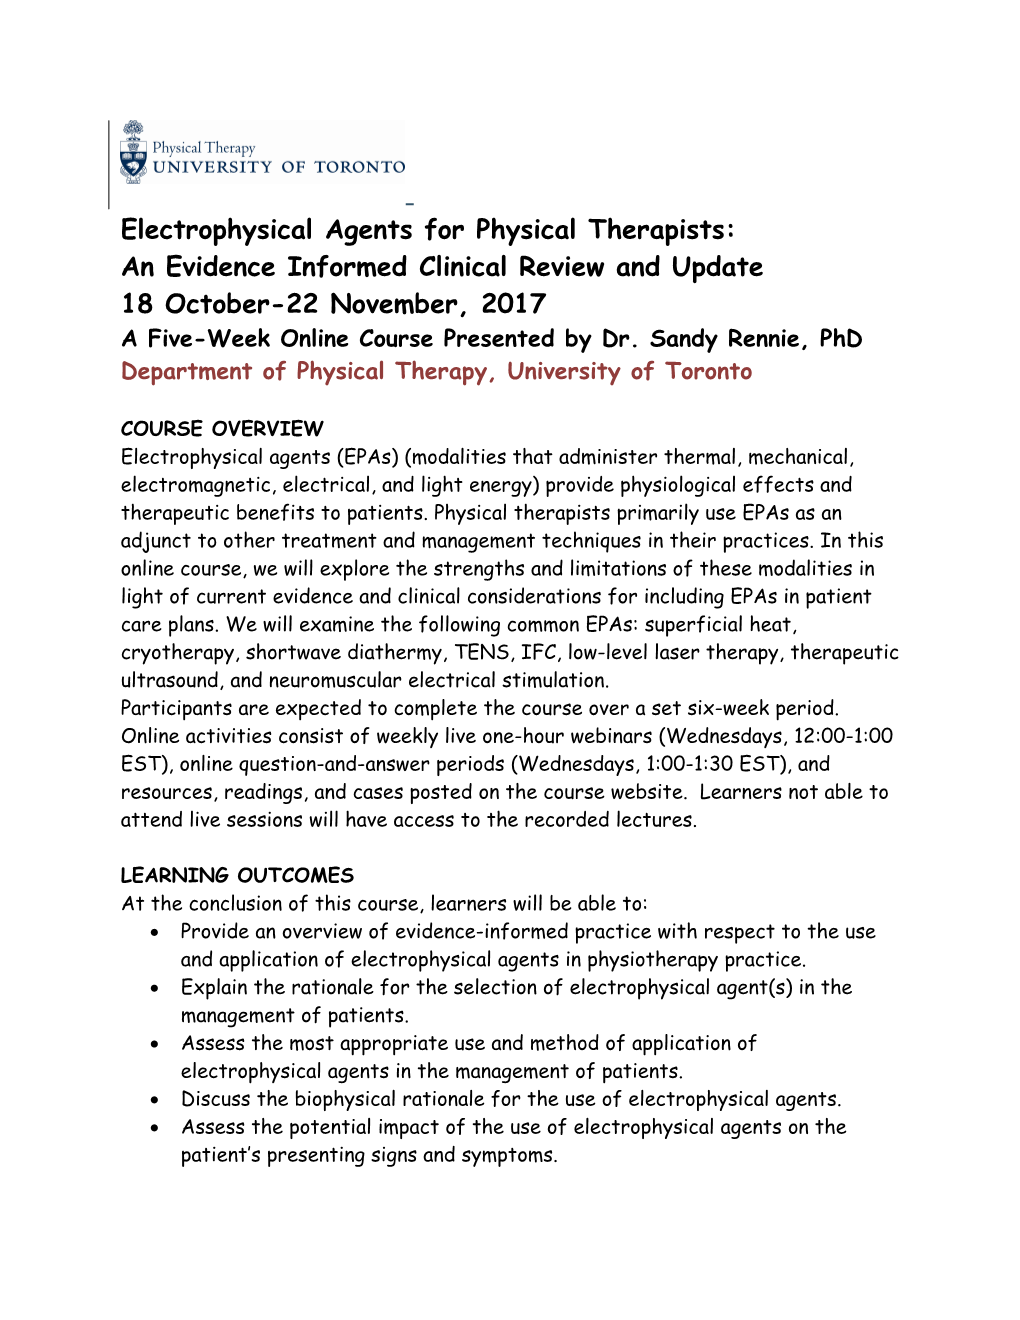 Electrophysical Agents for Physical Therapists